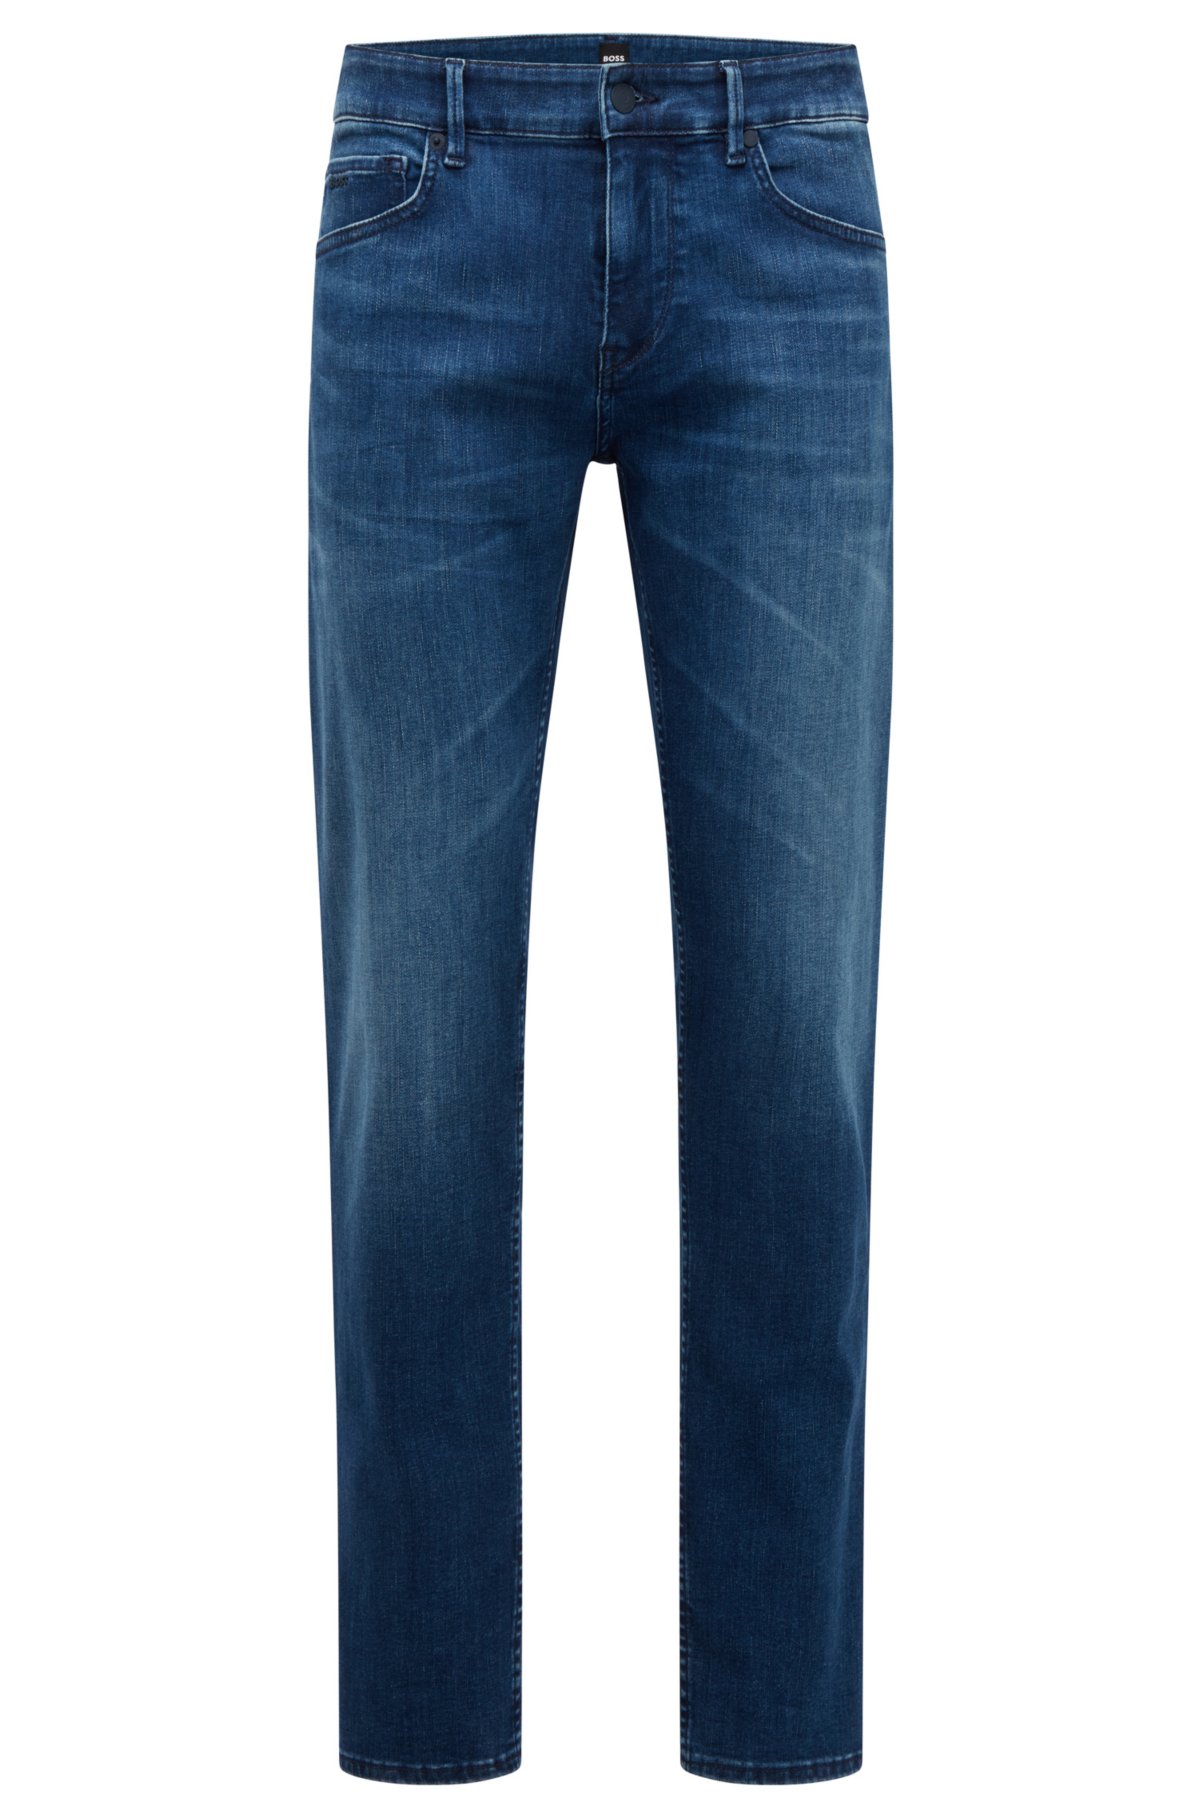 BOSS - Extra-slim-fit jeans in blue supreme-movement denim